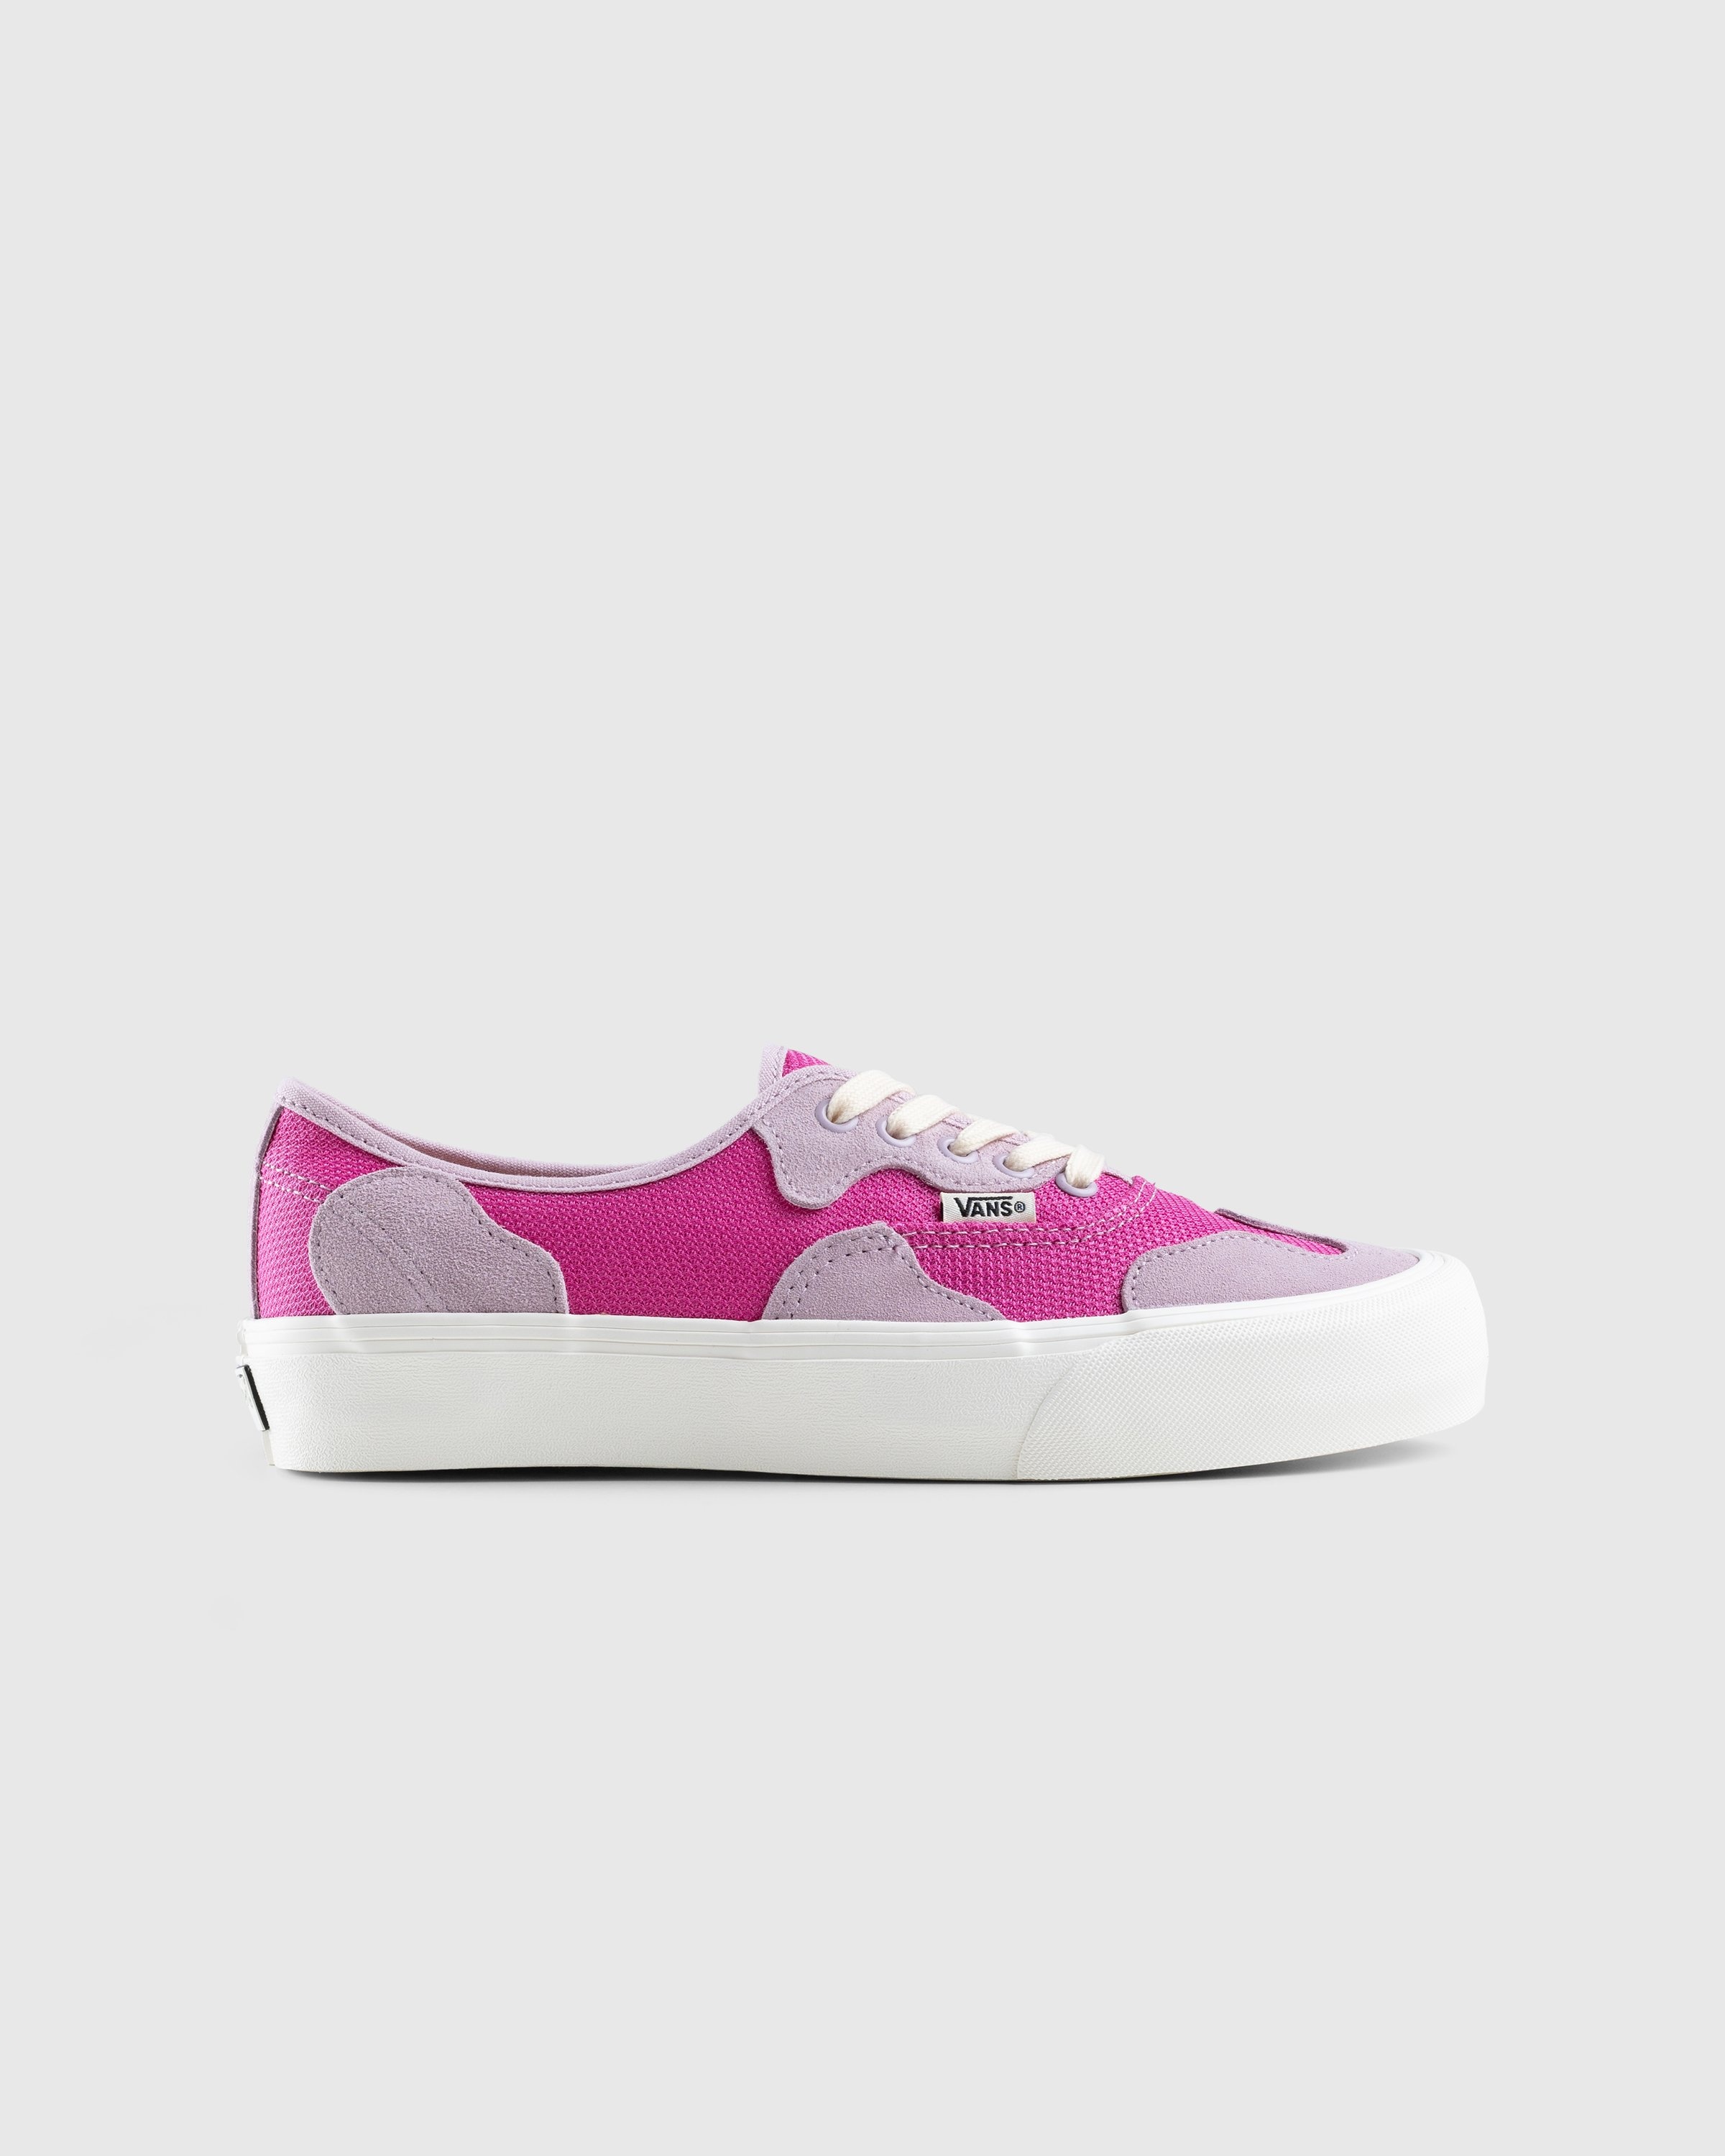 Vans – UA Authentic VR3 PW LX Pink - Sneakers - Pink - Image 1